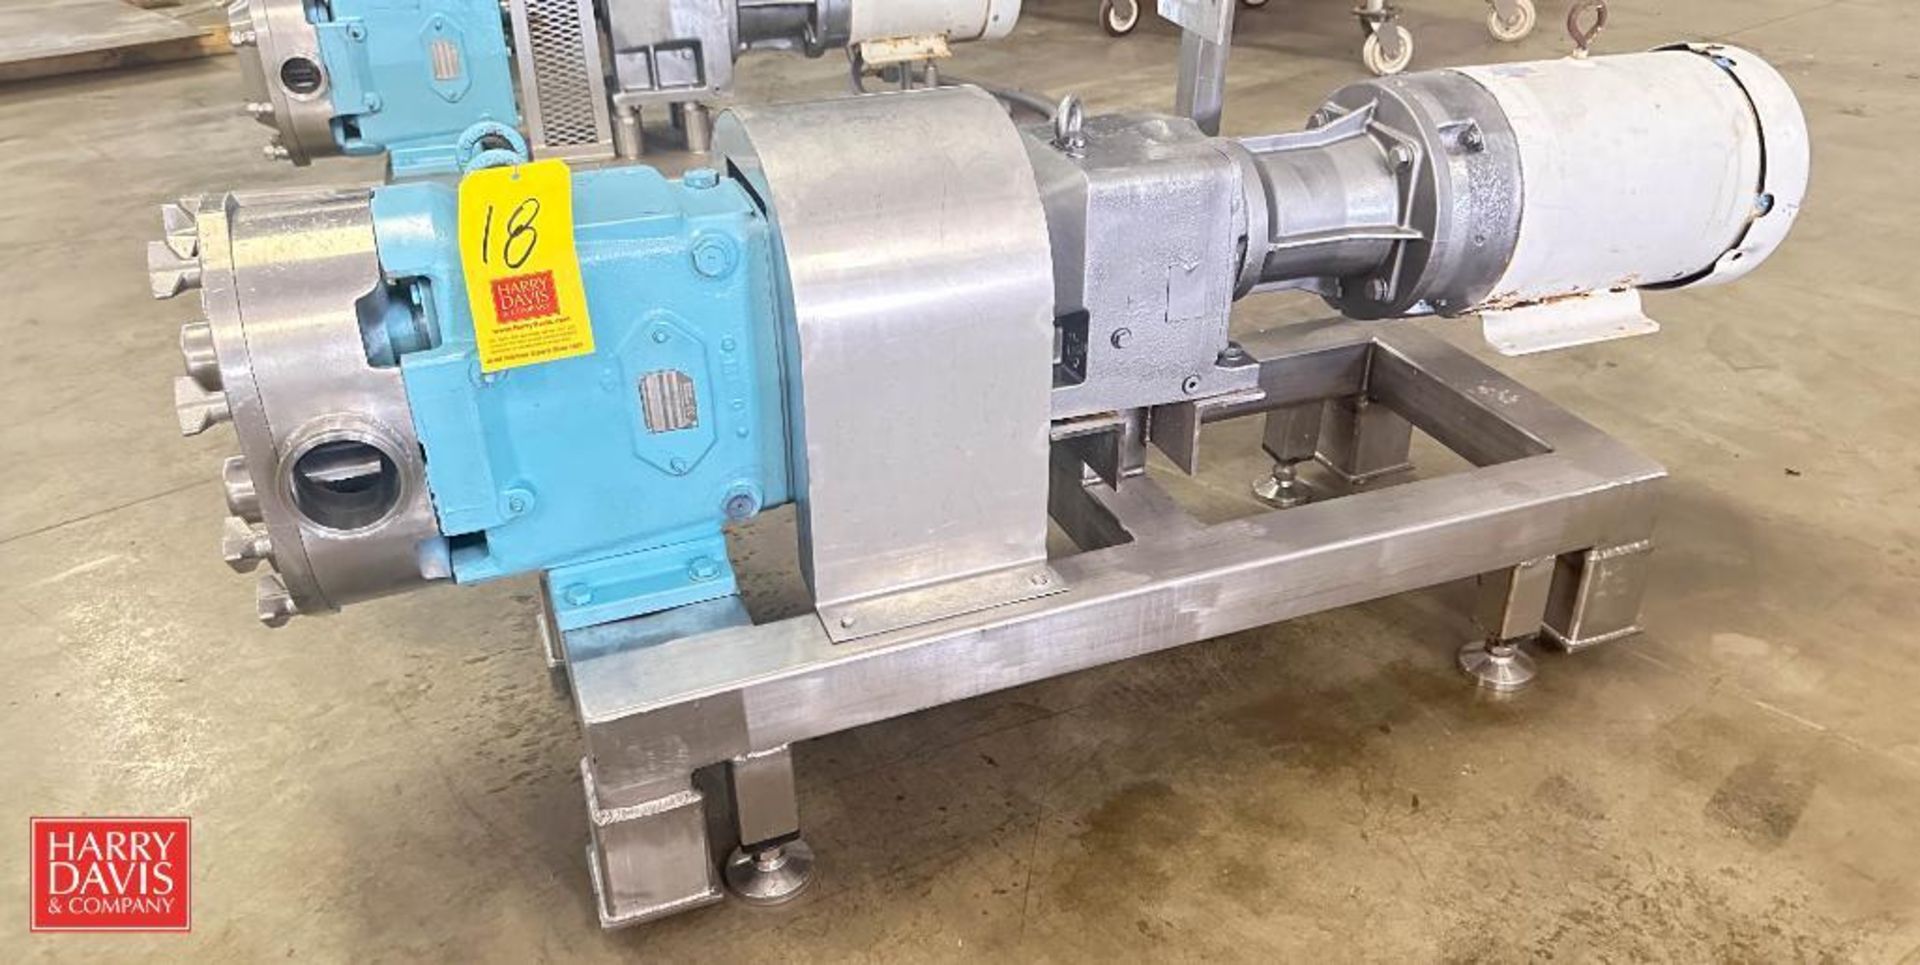 Waukesha-Cherry Burrell Positive Displacement Pump, Model: 13008, Mounted on S/S Base